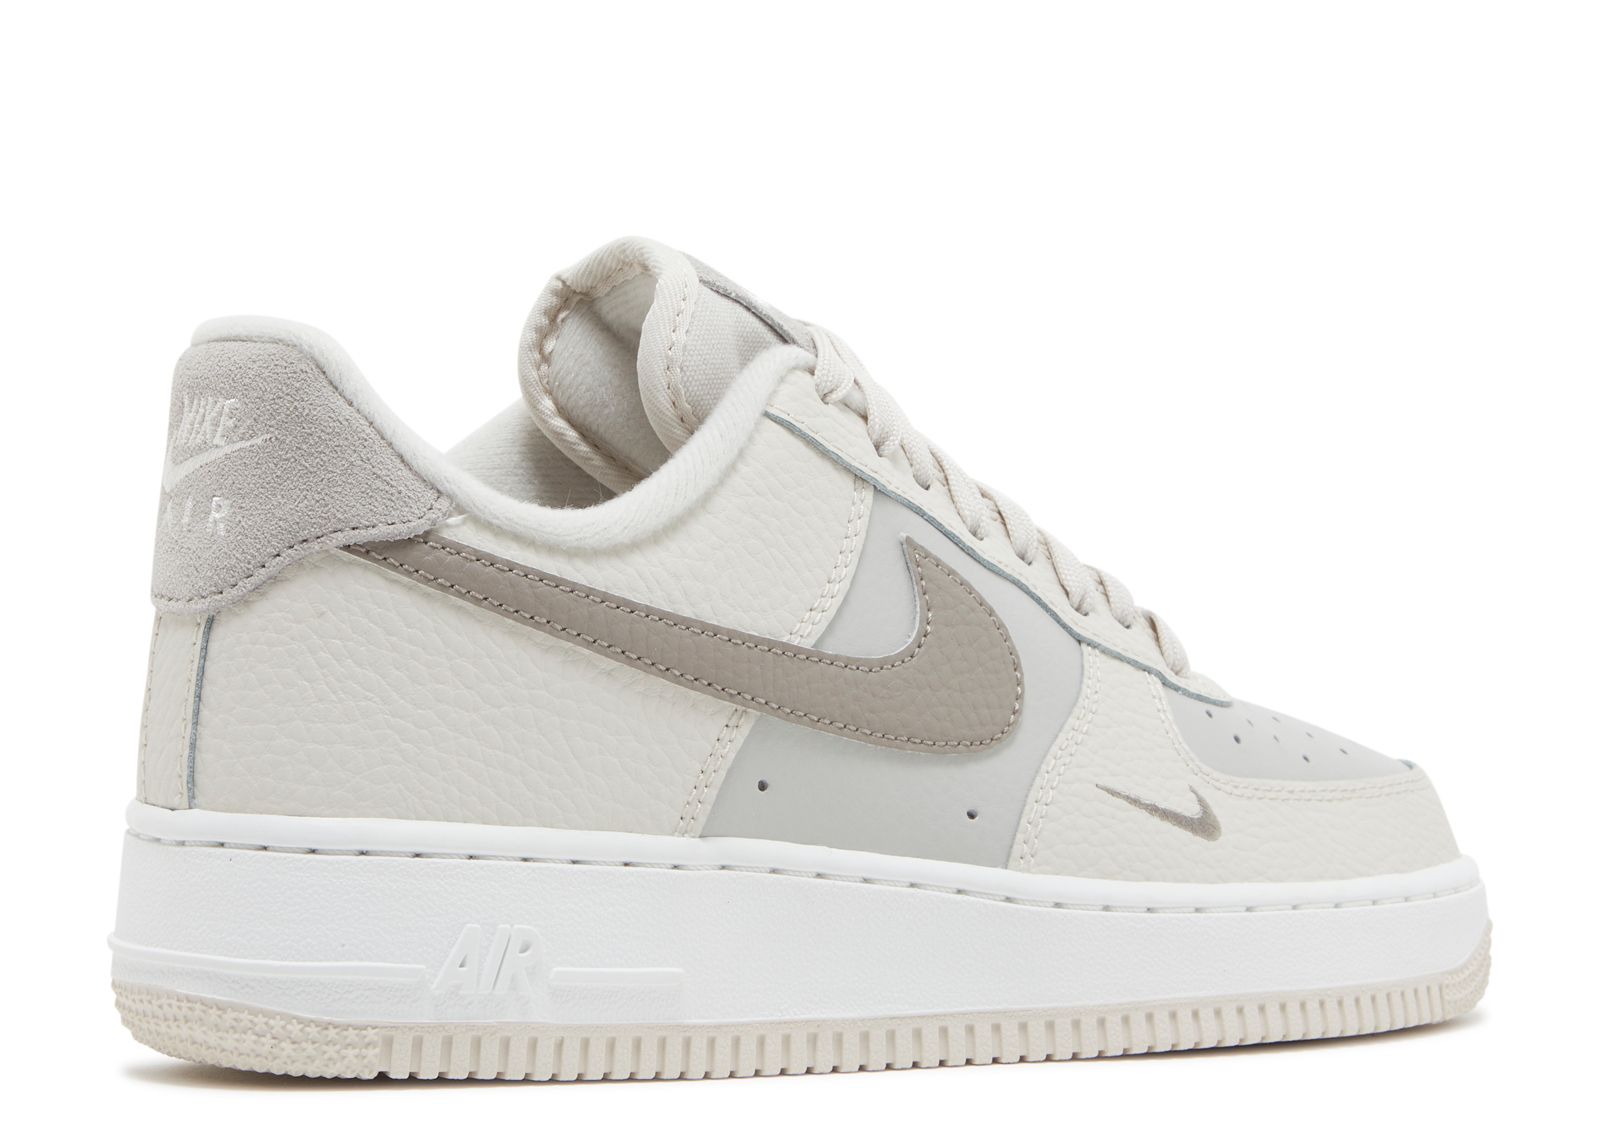 Wmns Air Force 1 Low '07 'Moon Fossil' - Nike - FB8483 100 - light